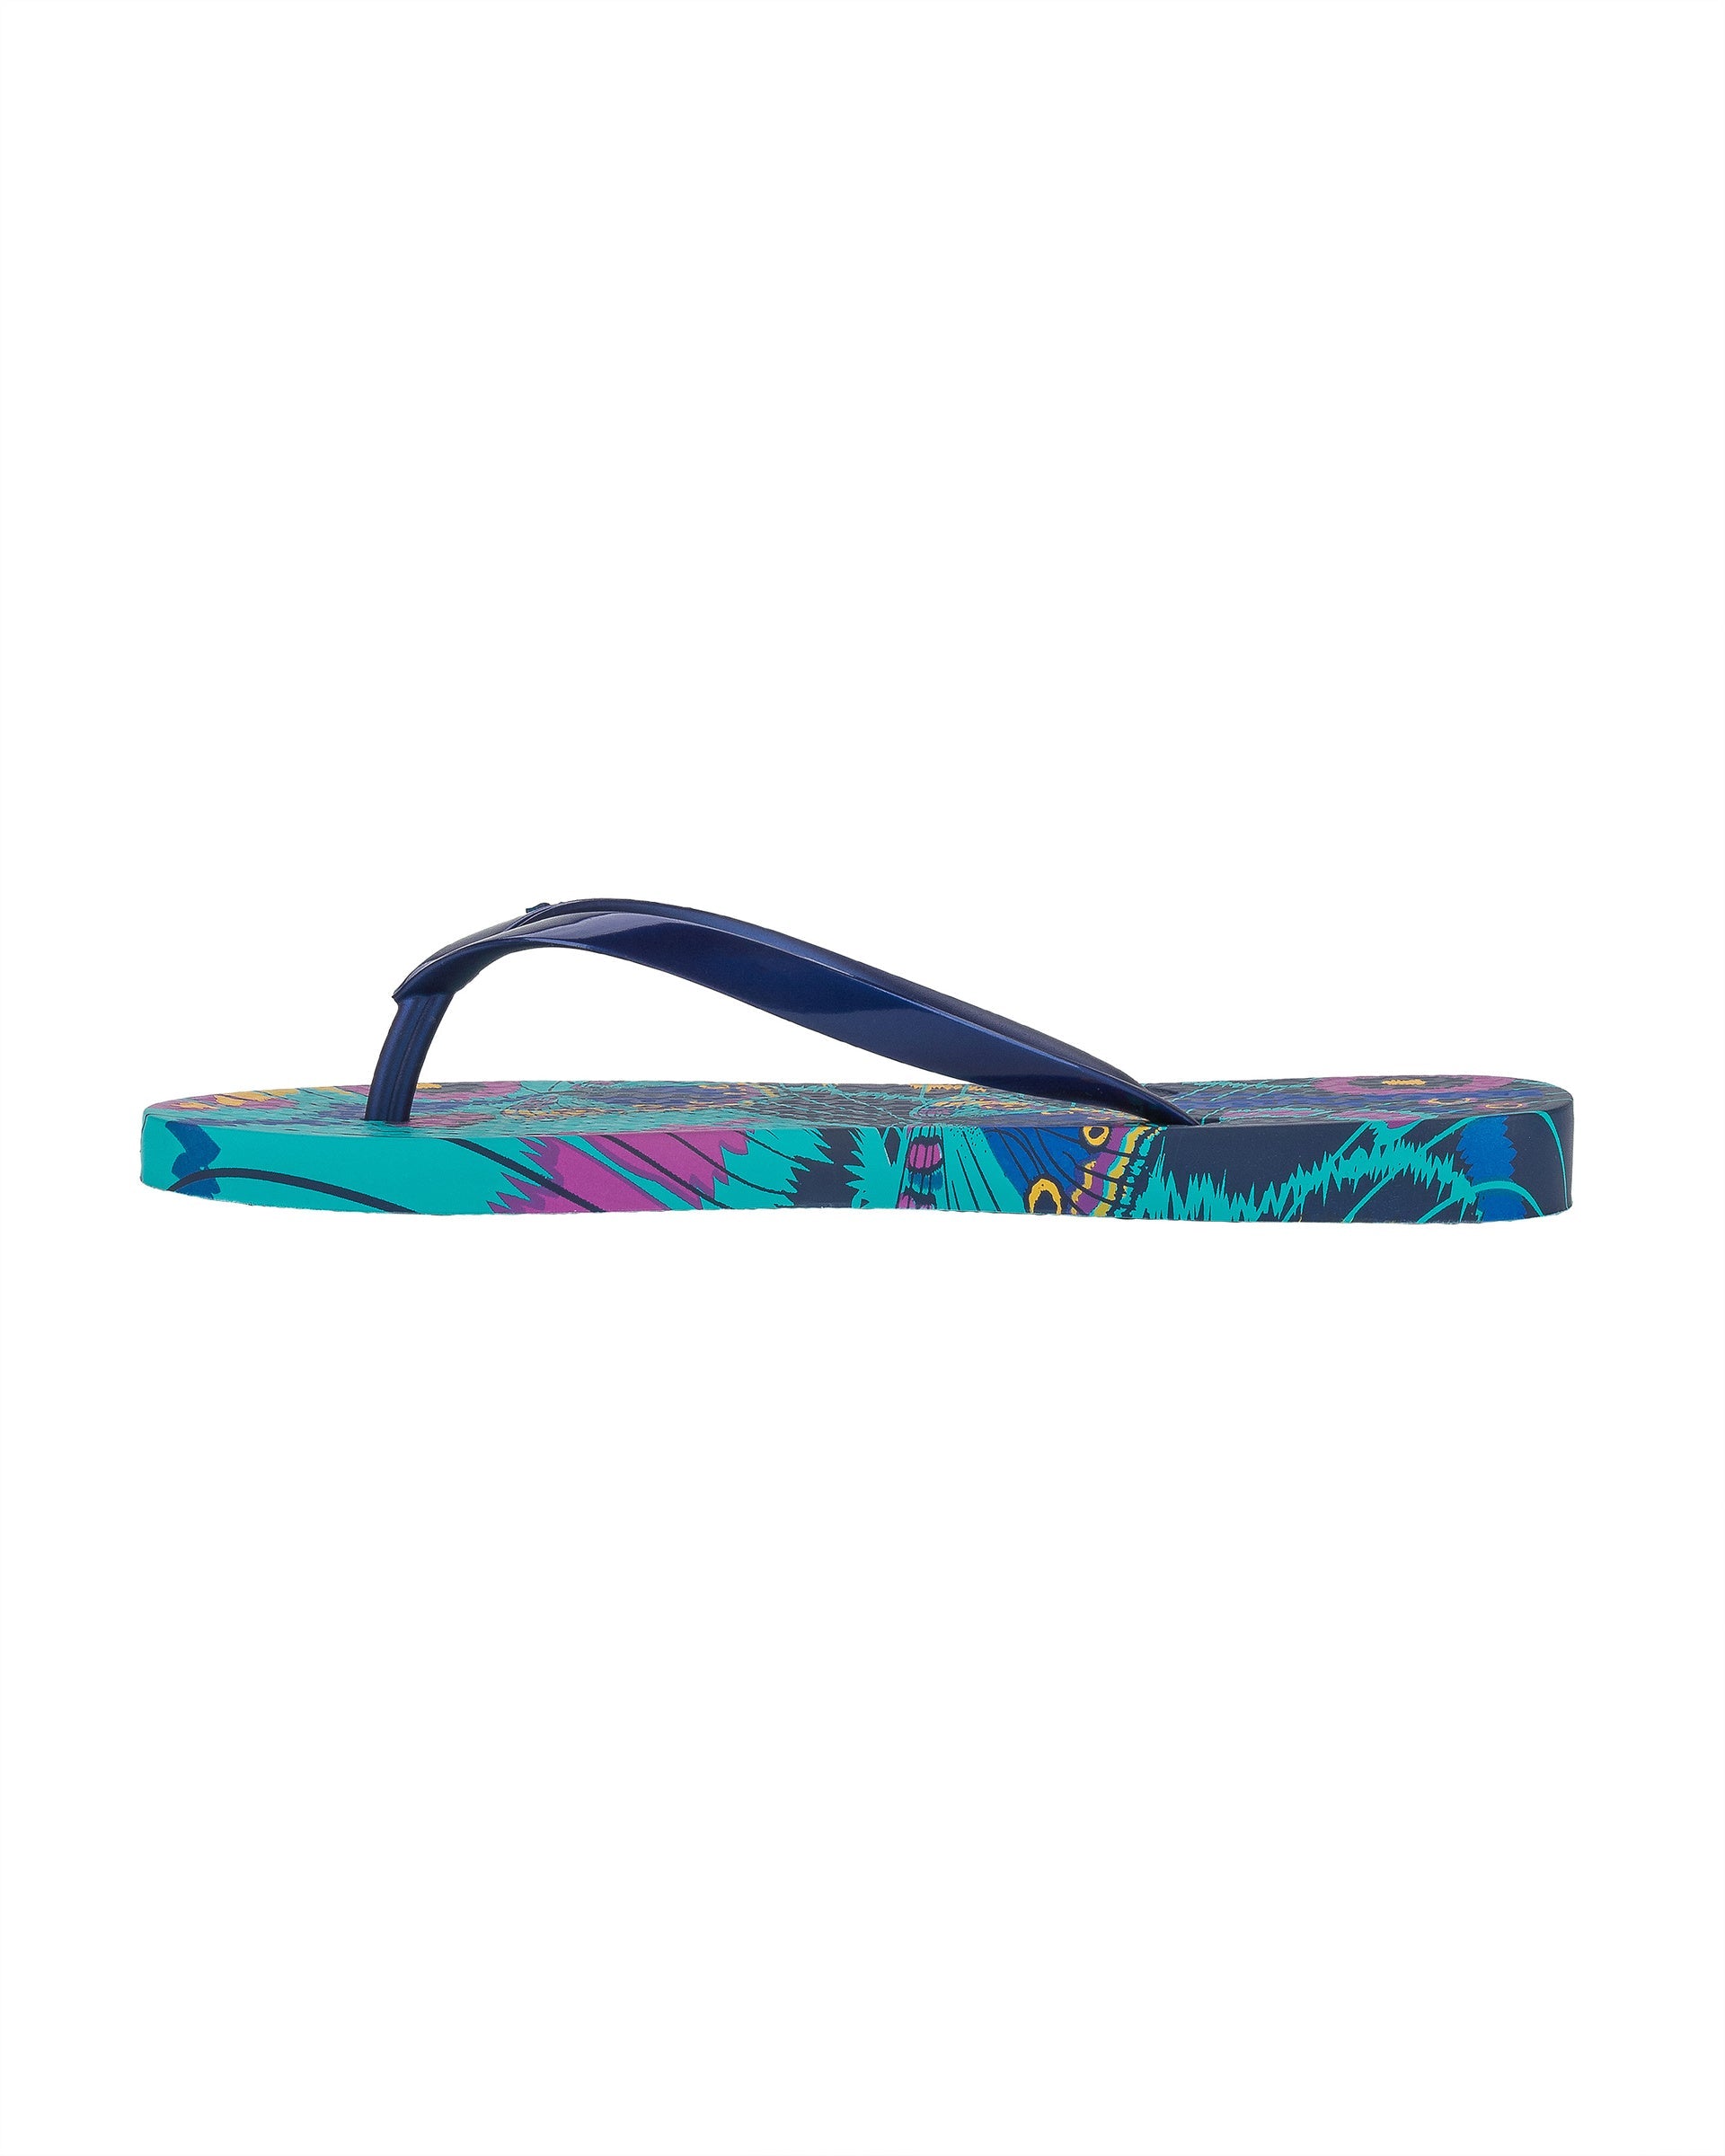 Inner side view of a blue Ipanema Animal Print women's flip flop with glitter blue straps and butterfly sole print.